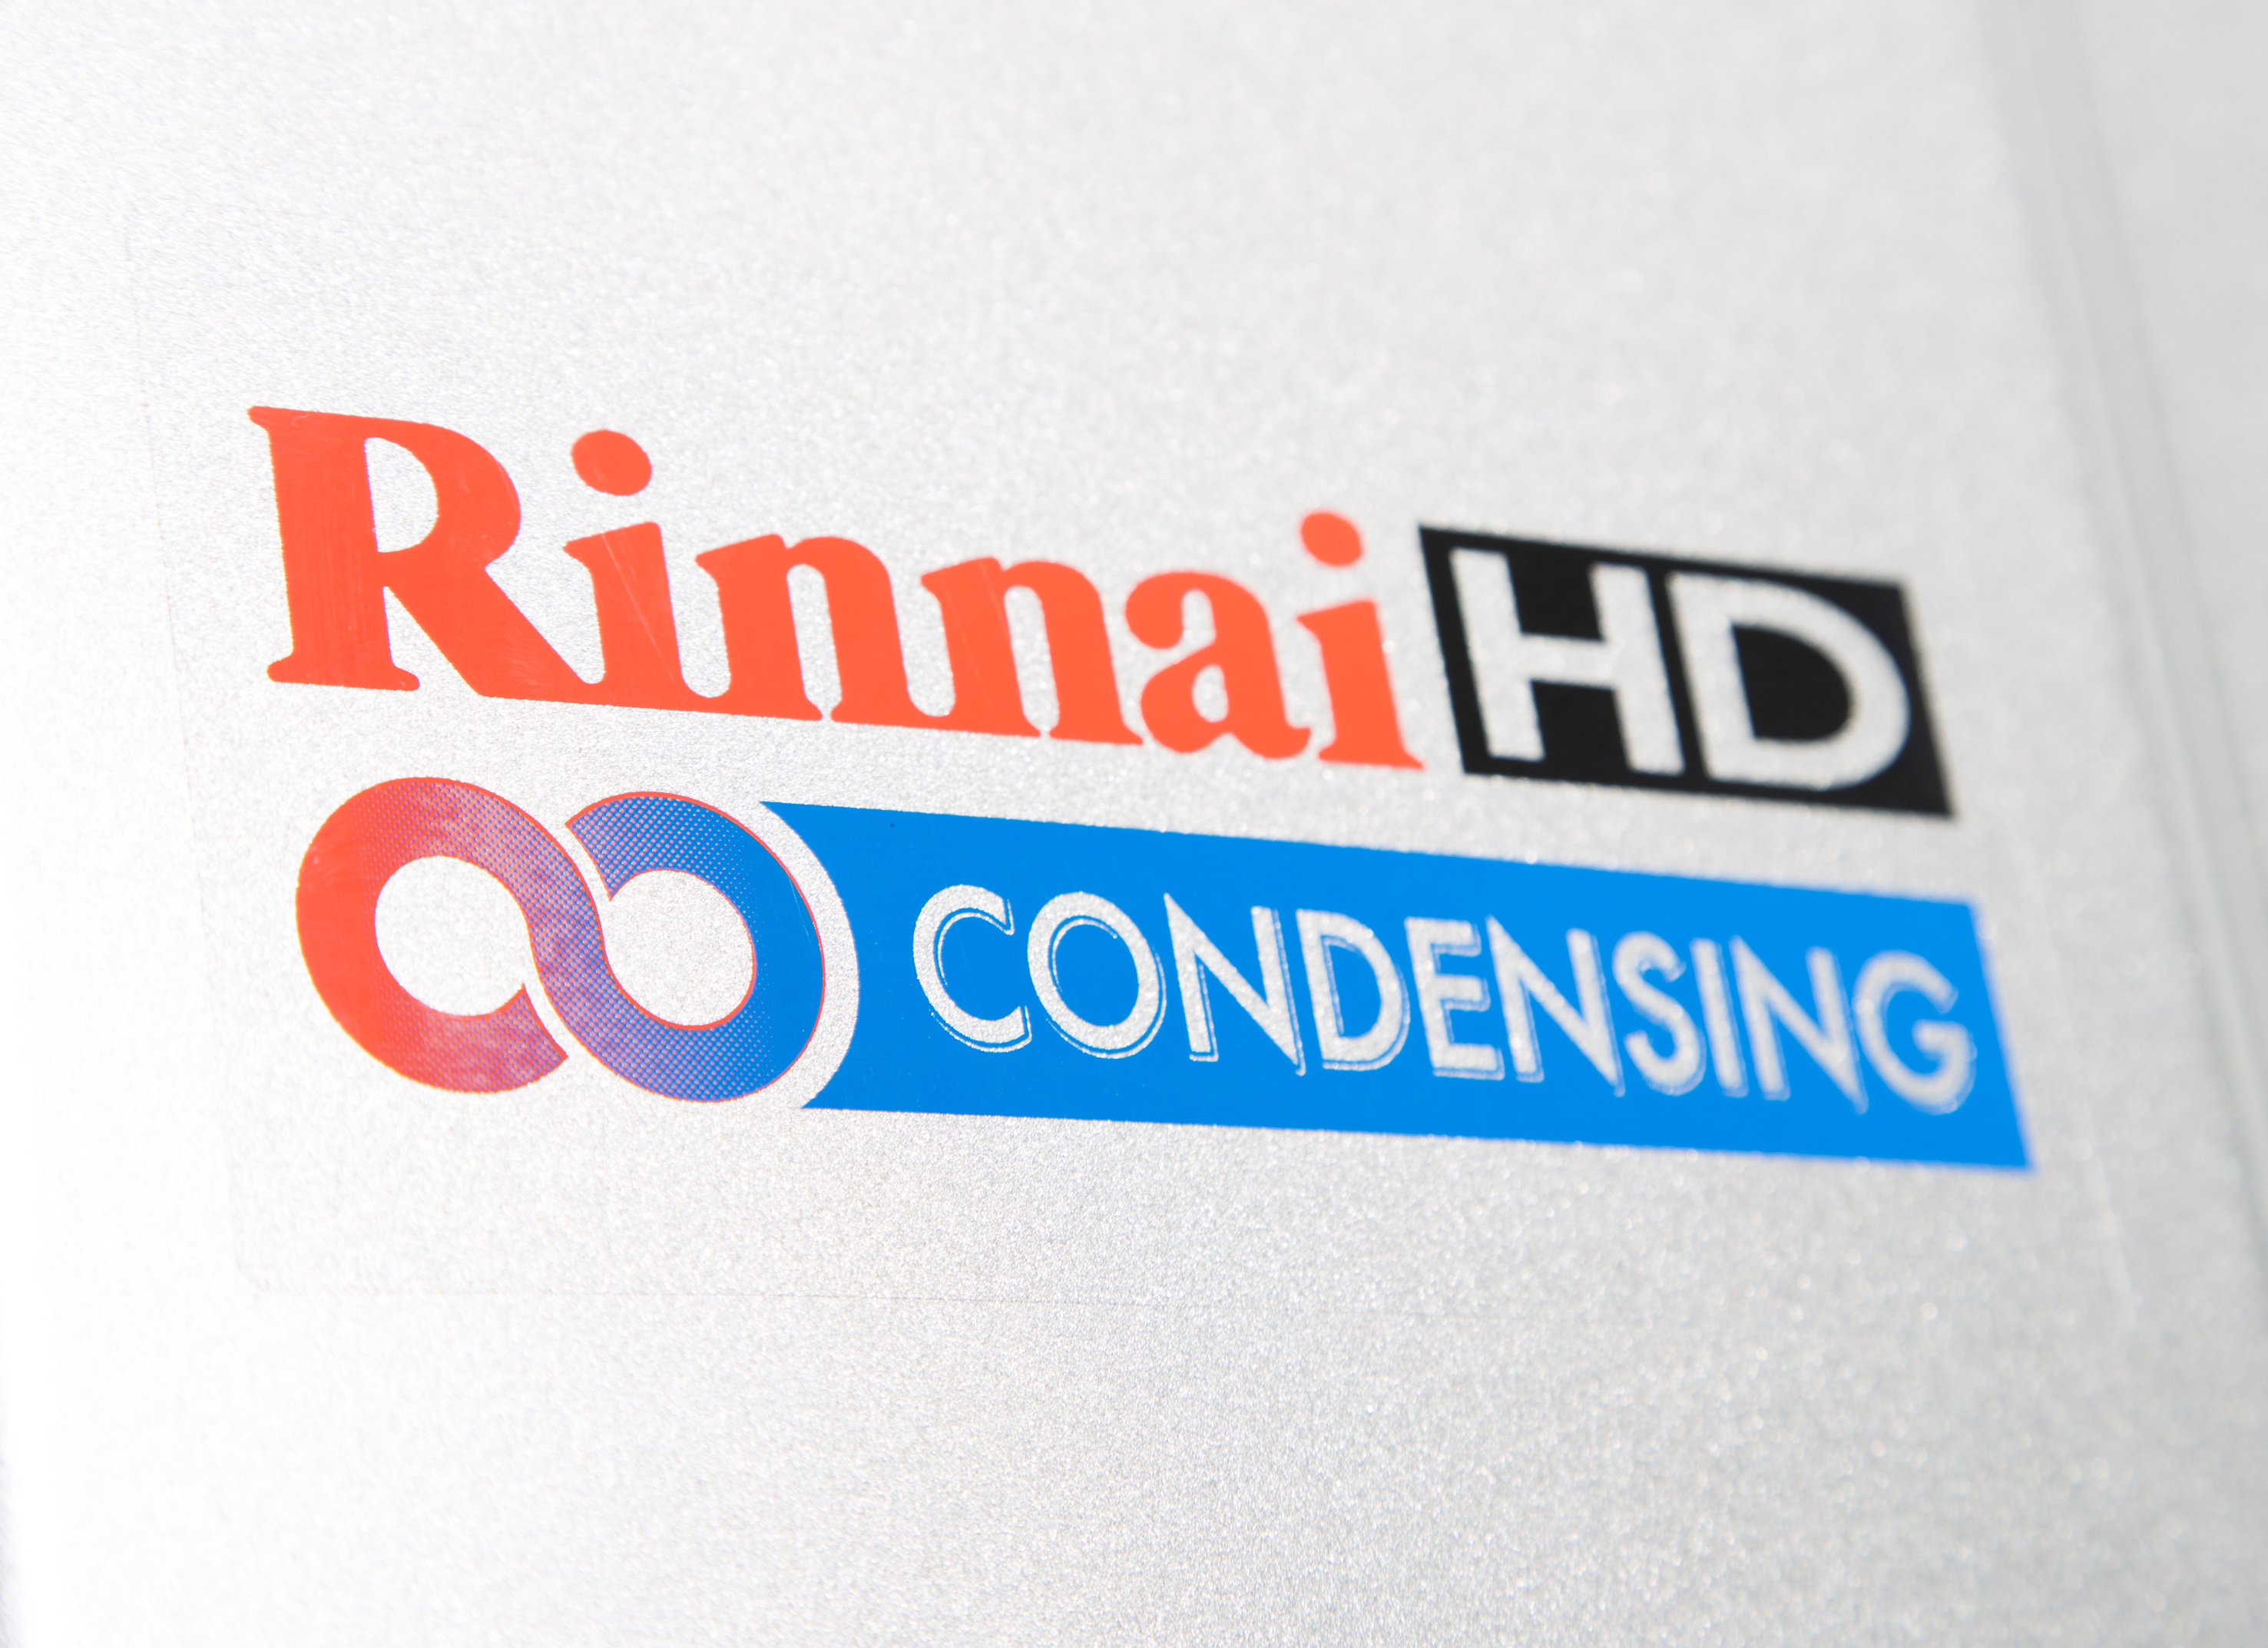 RINNAI CPD ON CONTINUOUS FLOW HOT WATER DELIVERY ON DEMAND NOW FULLY APPROVED BY CIBSE @rinnai_uk